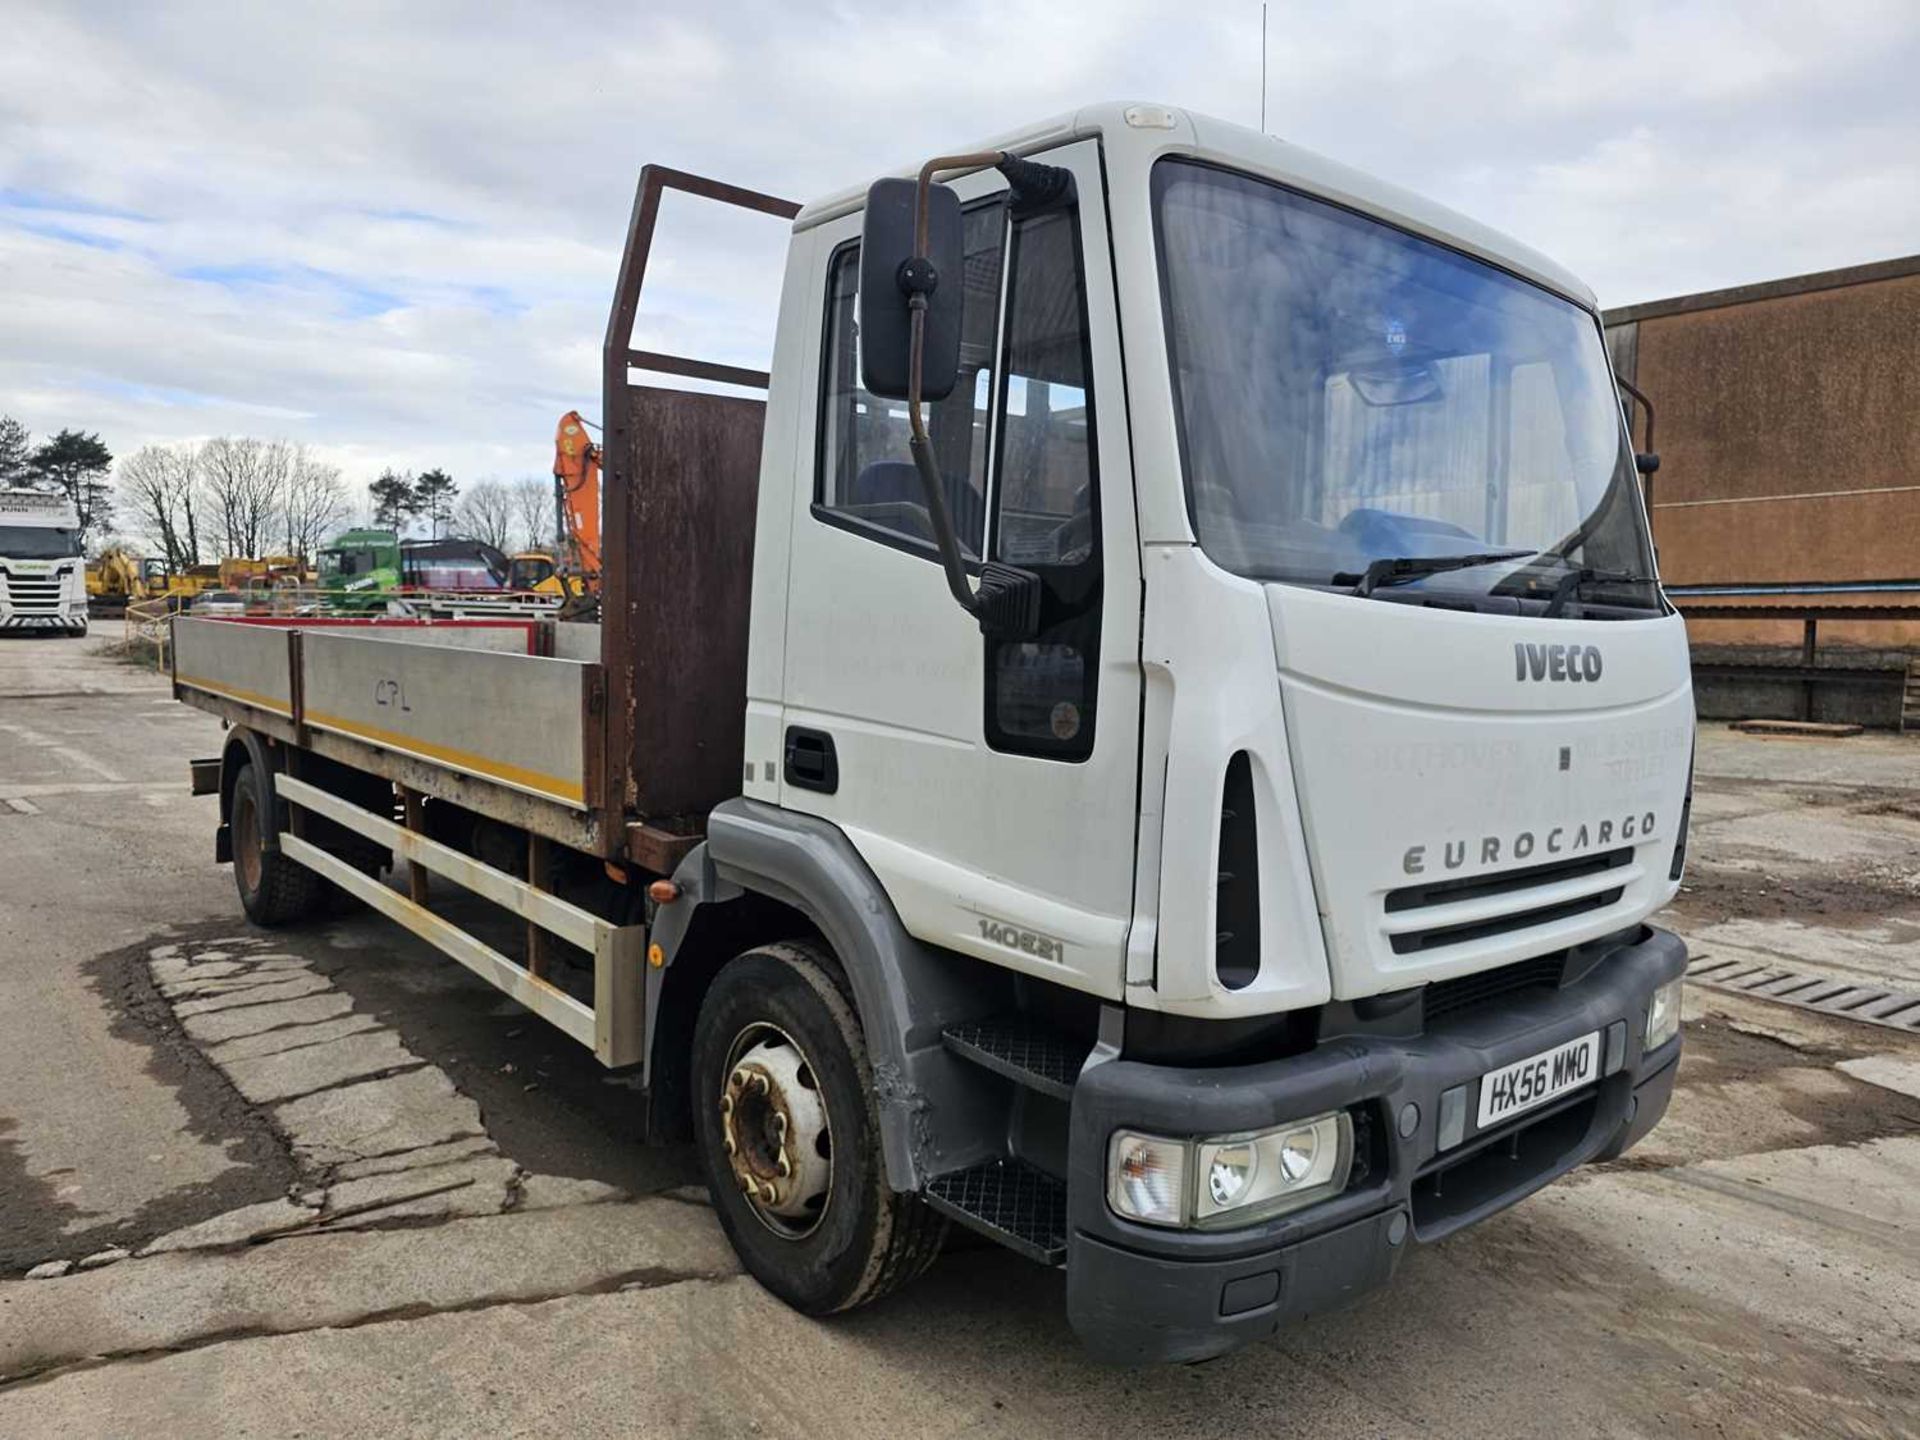 Iveco 140E21 4x2 Drop Side Flat Bed Lorry, Manual Gear Box (Reg. Docs. Available) - Image 7 of 19